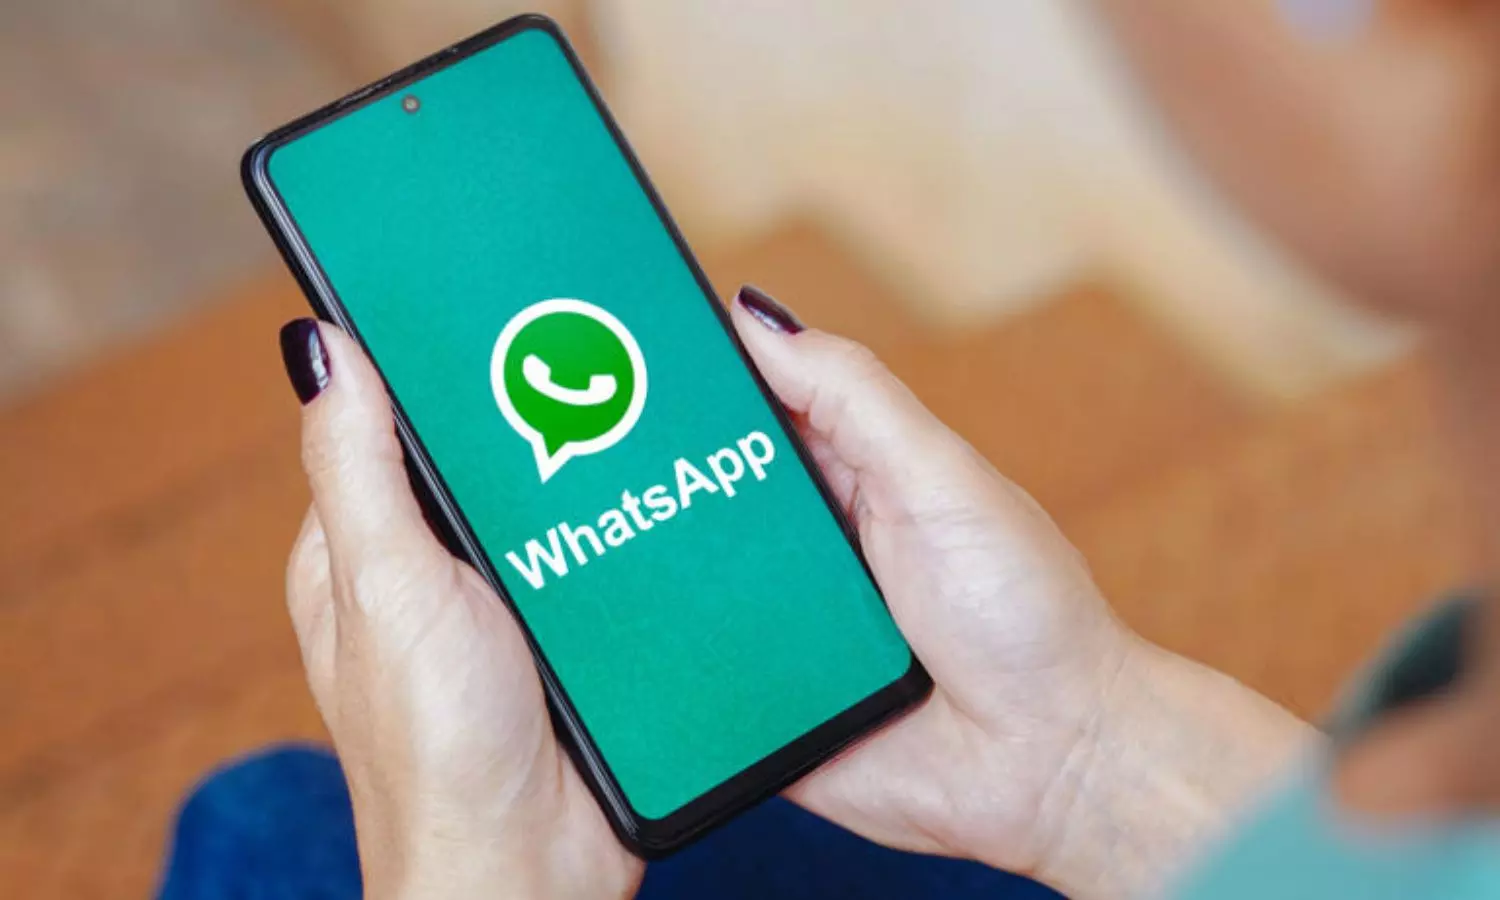 Find out if you have been blocked on WhatsApp easily